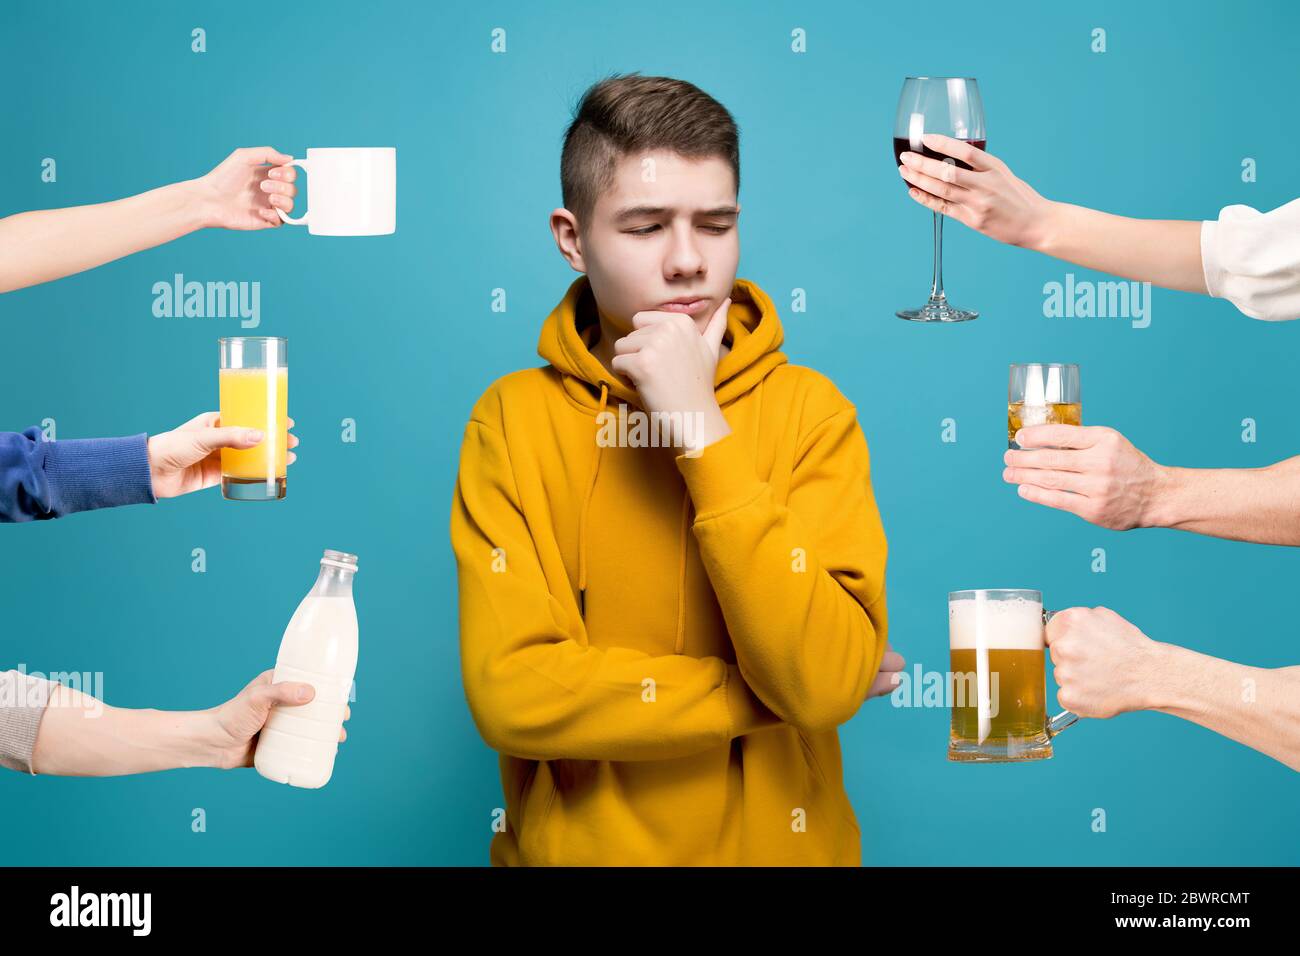 A young man in a sweatshirt looks doubtfully at an imaginary obj Stock Photo